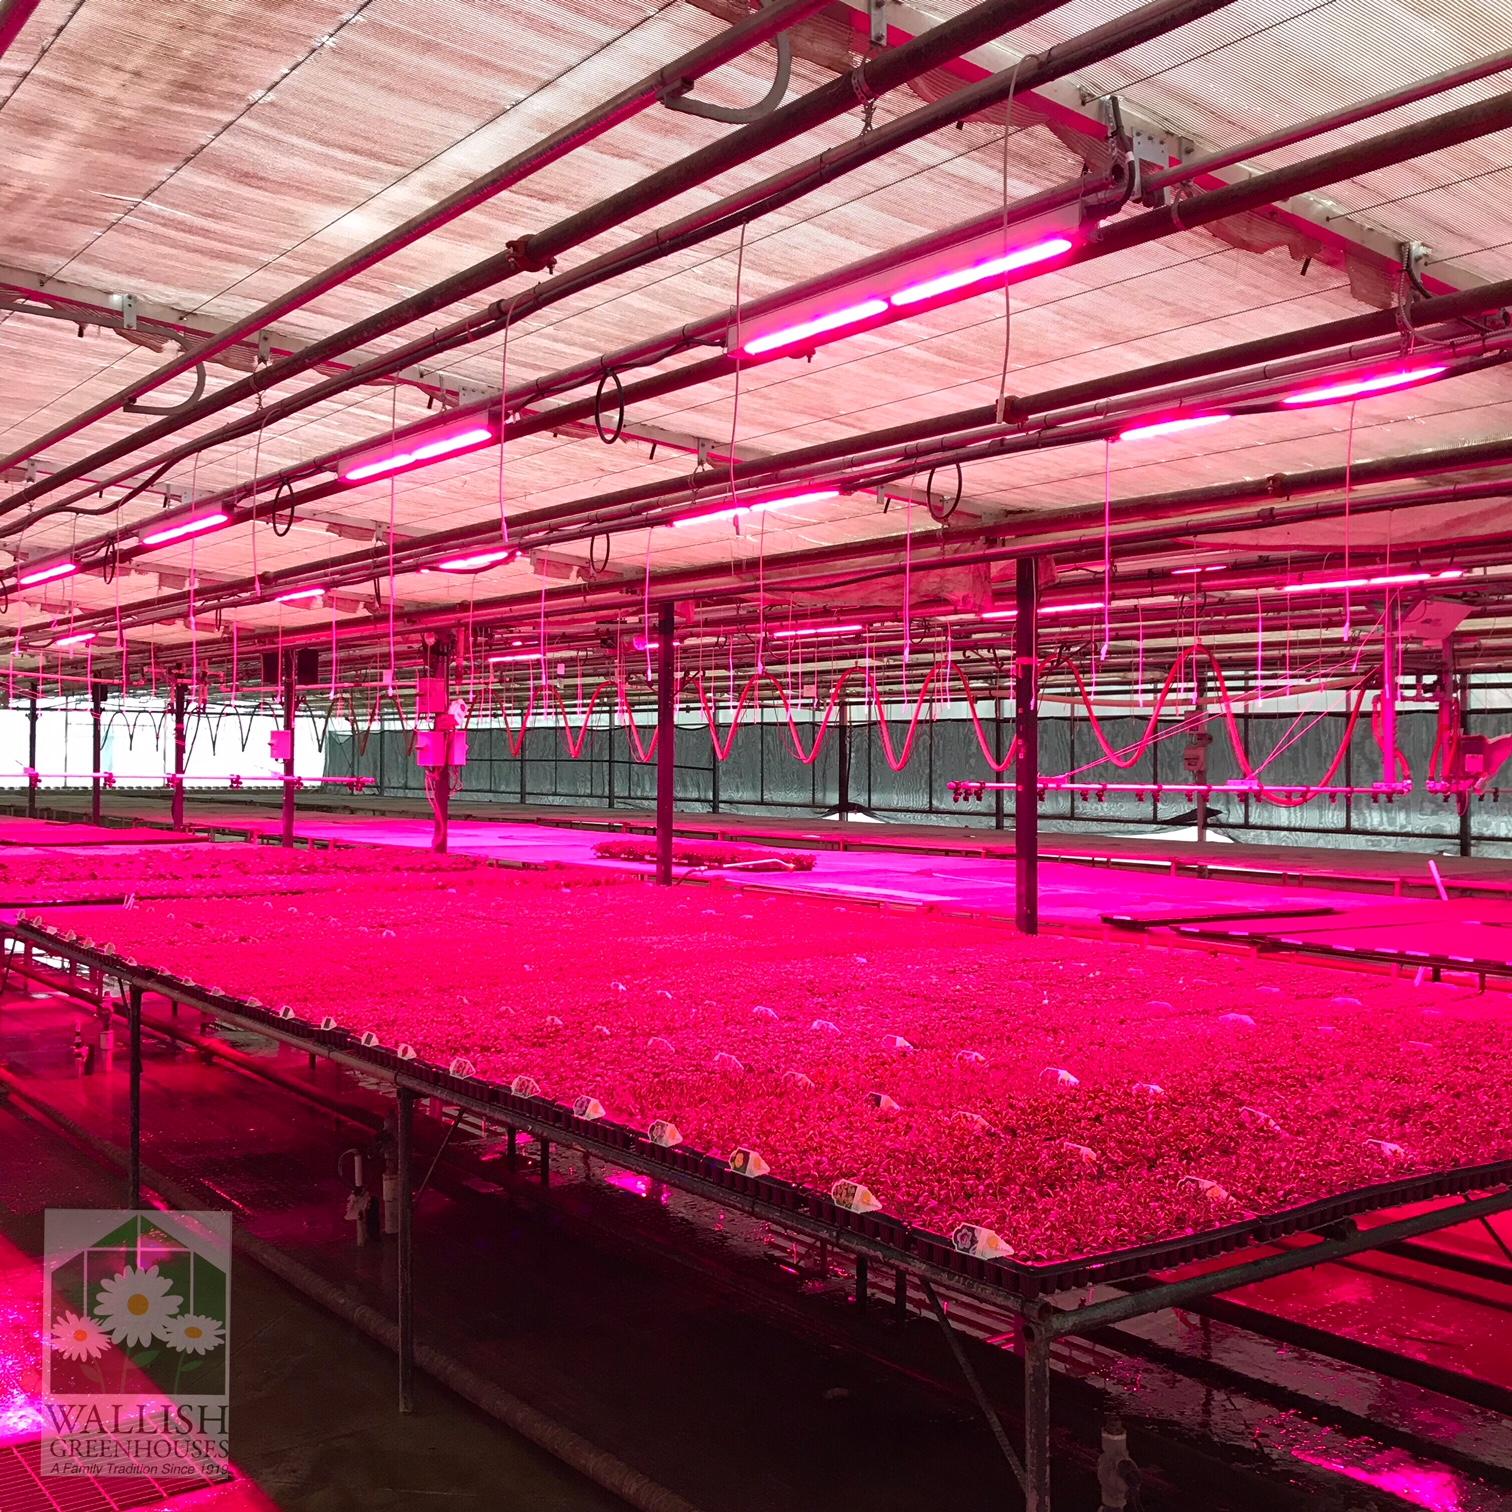 How to Use Supplemental LED Grow Lights